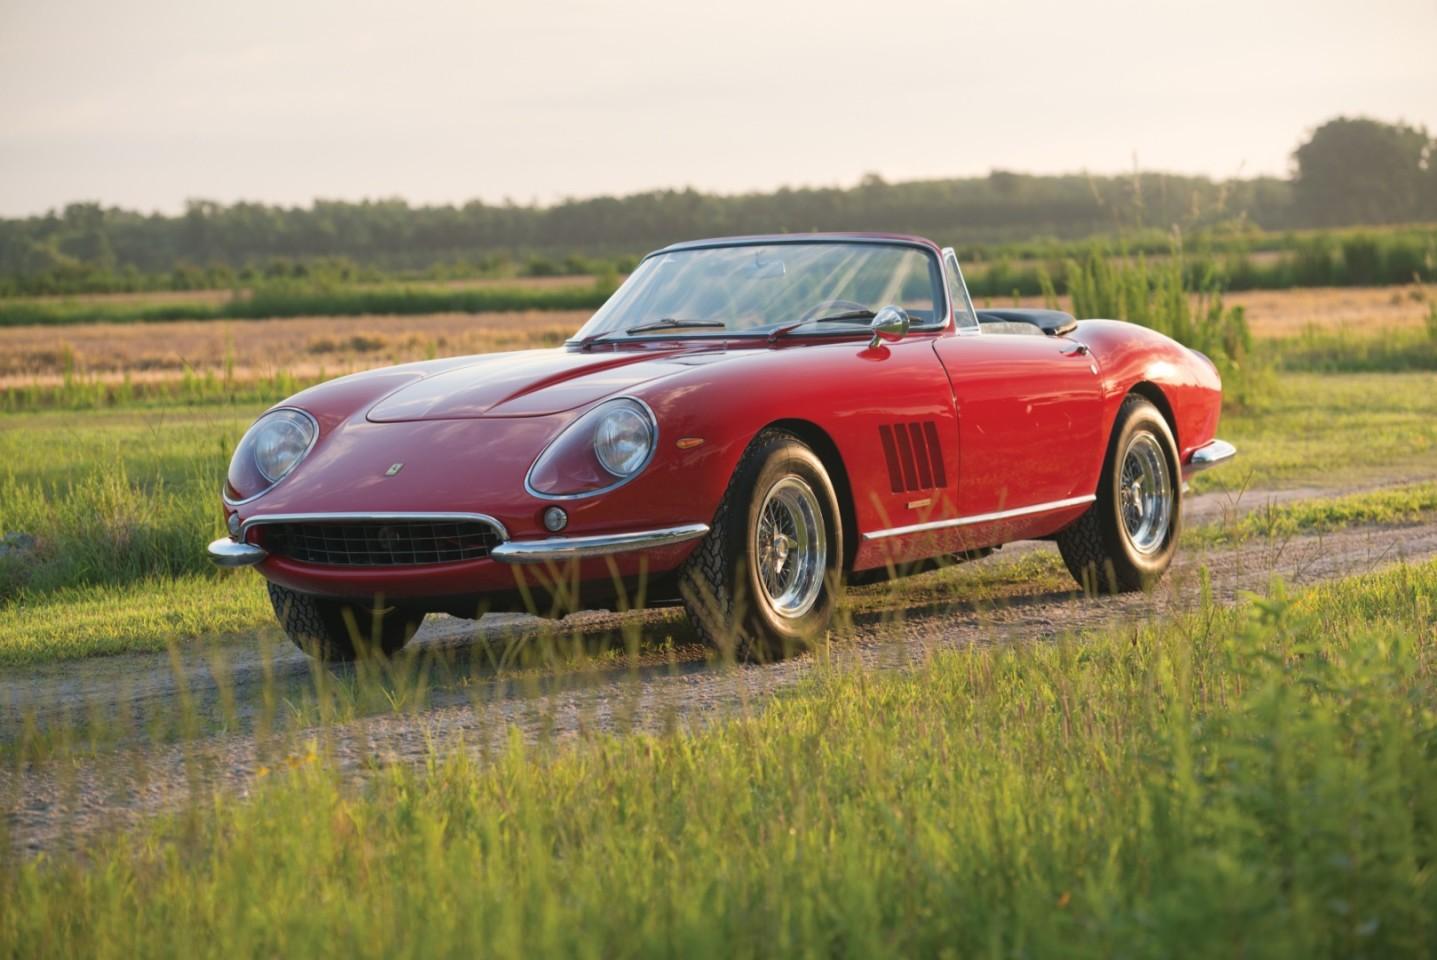 In 2013, one of ten 1967 Ferrari 275 GTB/4 S NART Spiders sold at auction for $ 27,700,000.